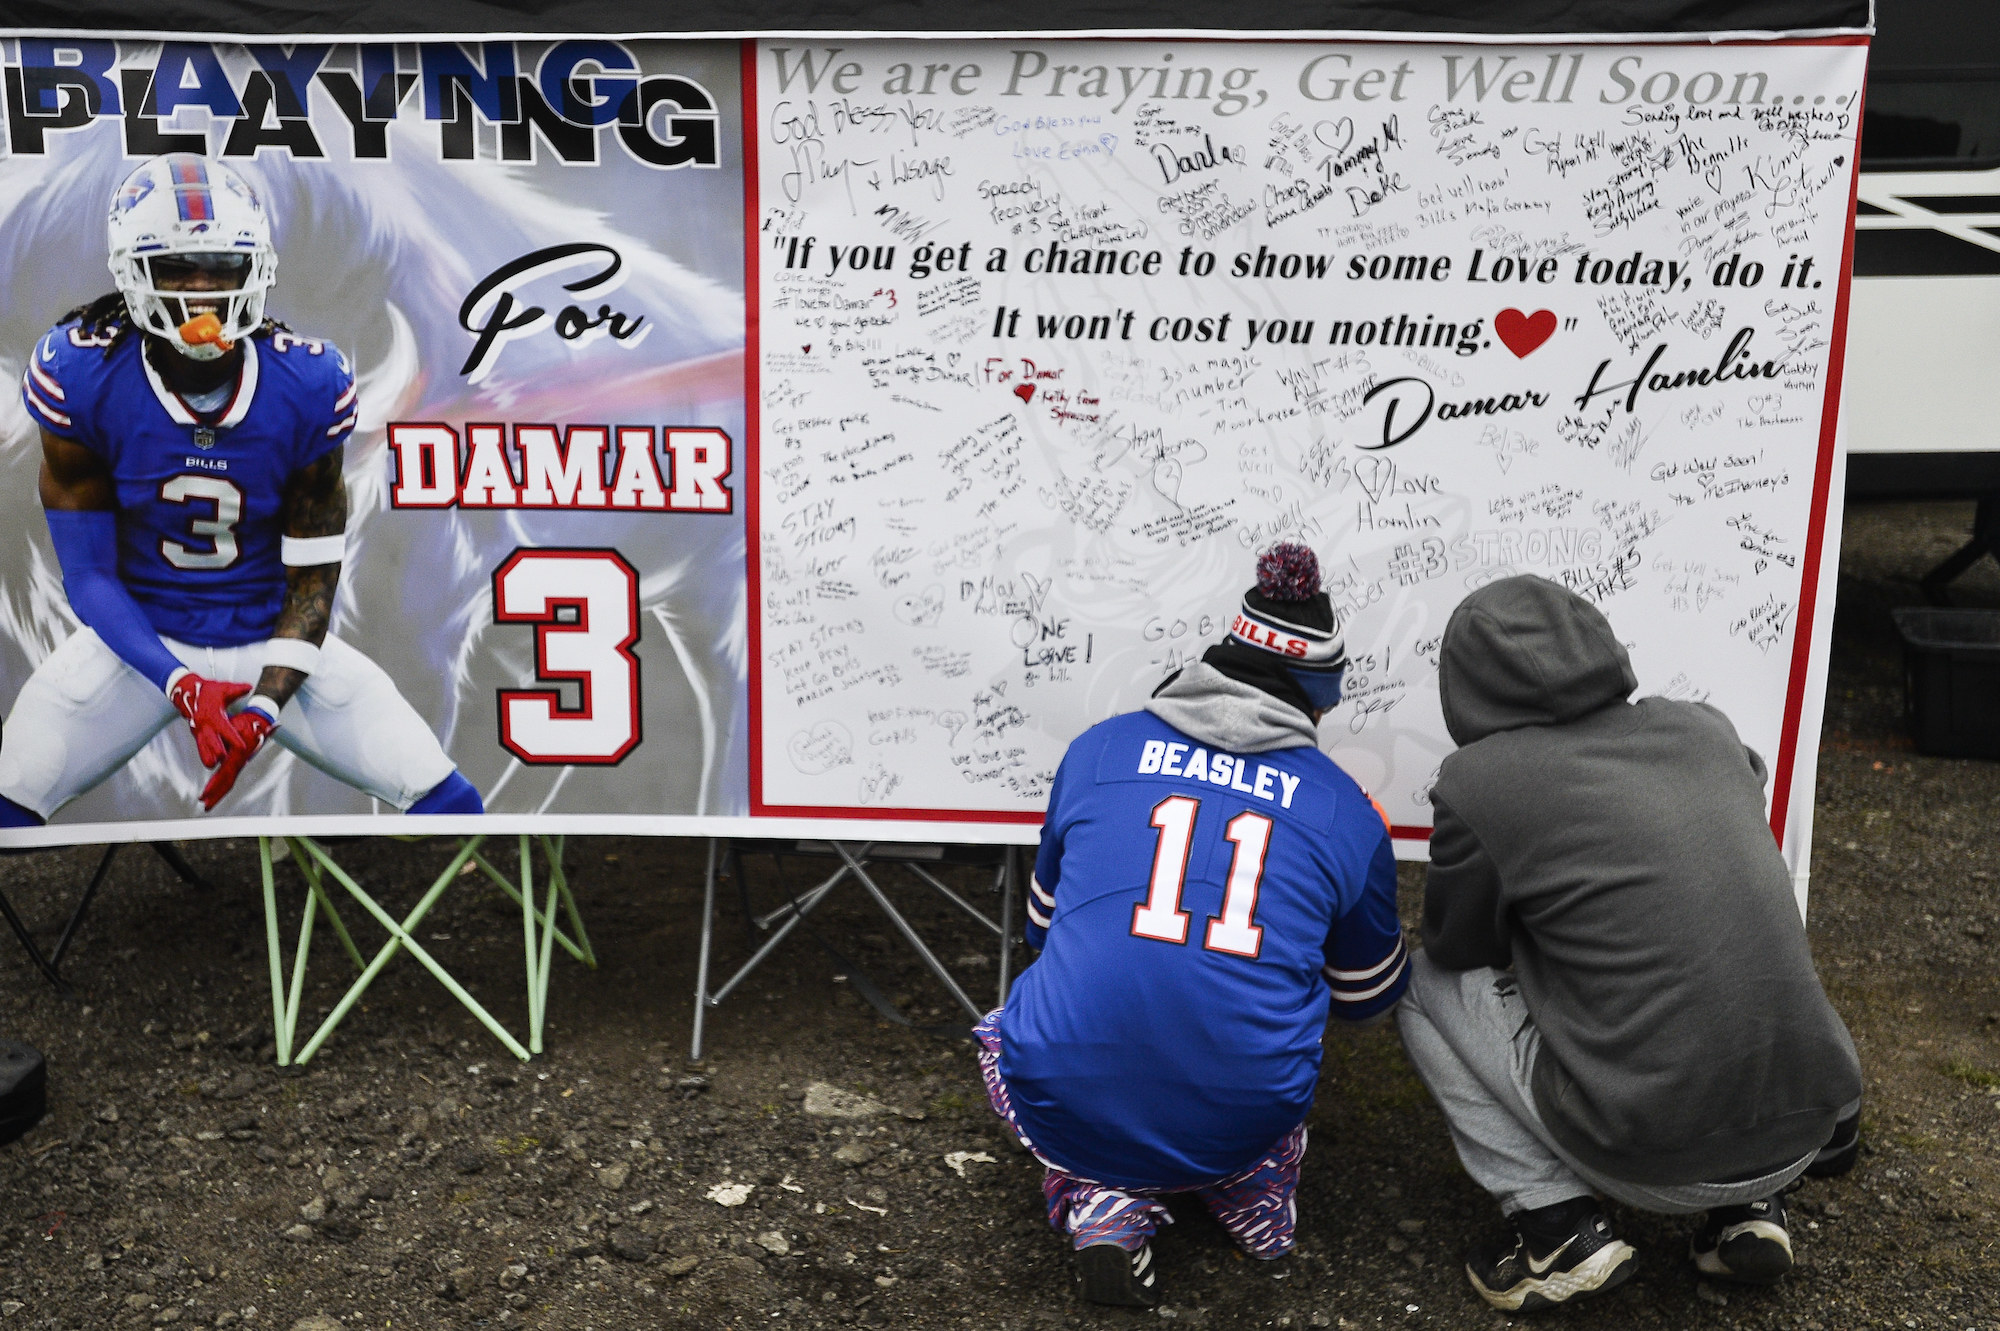 Two fans crouching down to sign a board with &quot;Damar 3&quot; and many handwritten messages on it